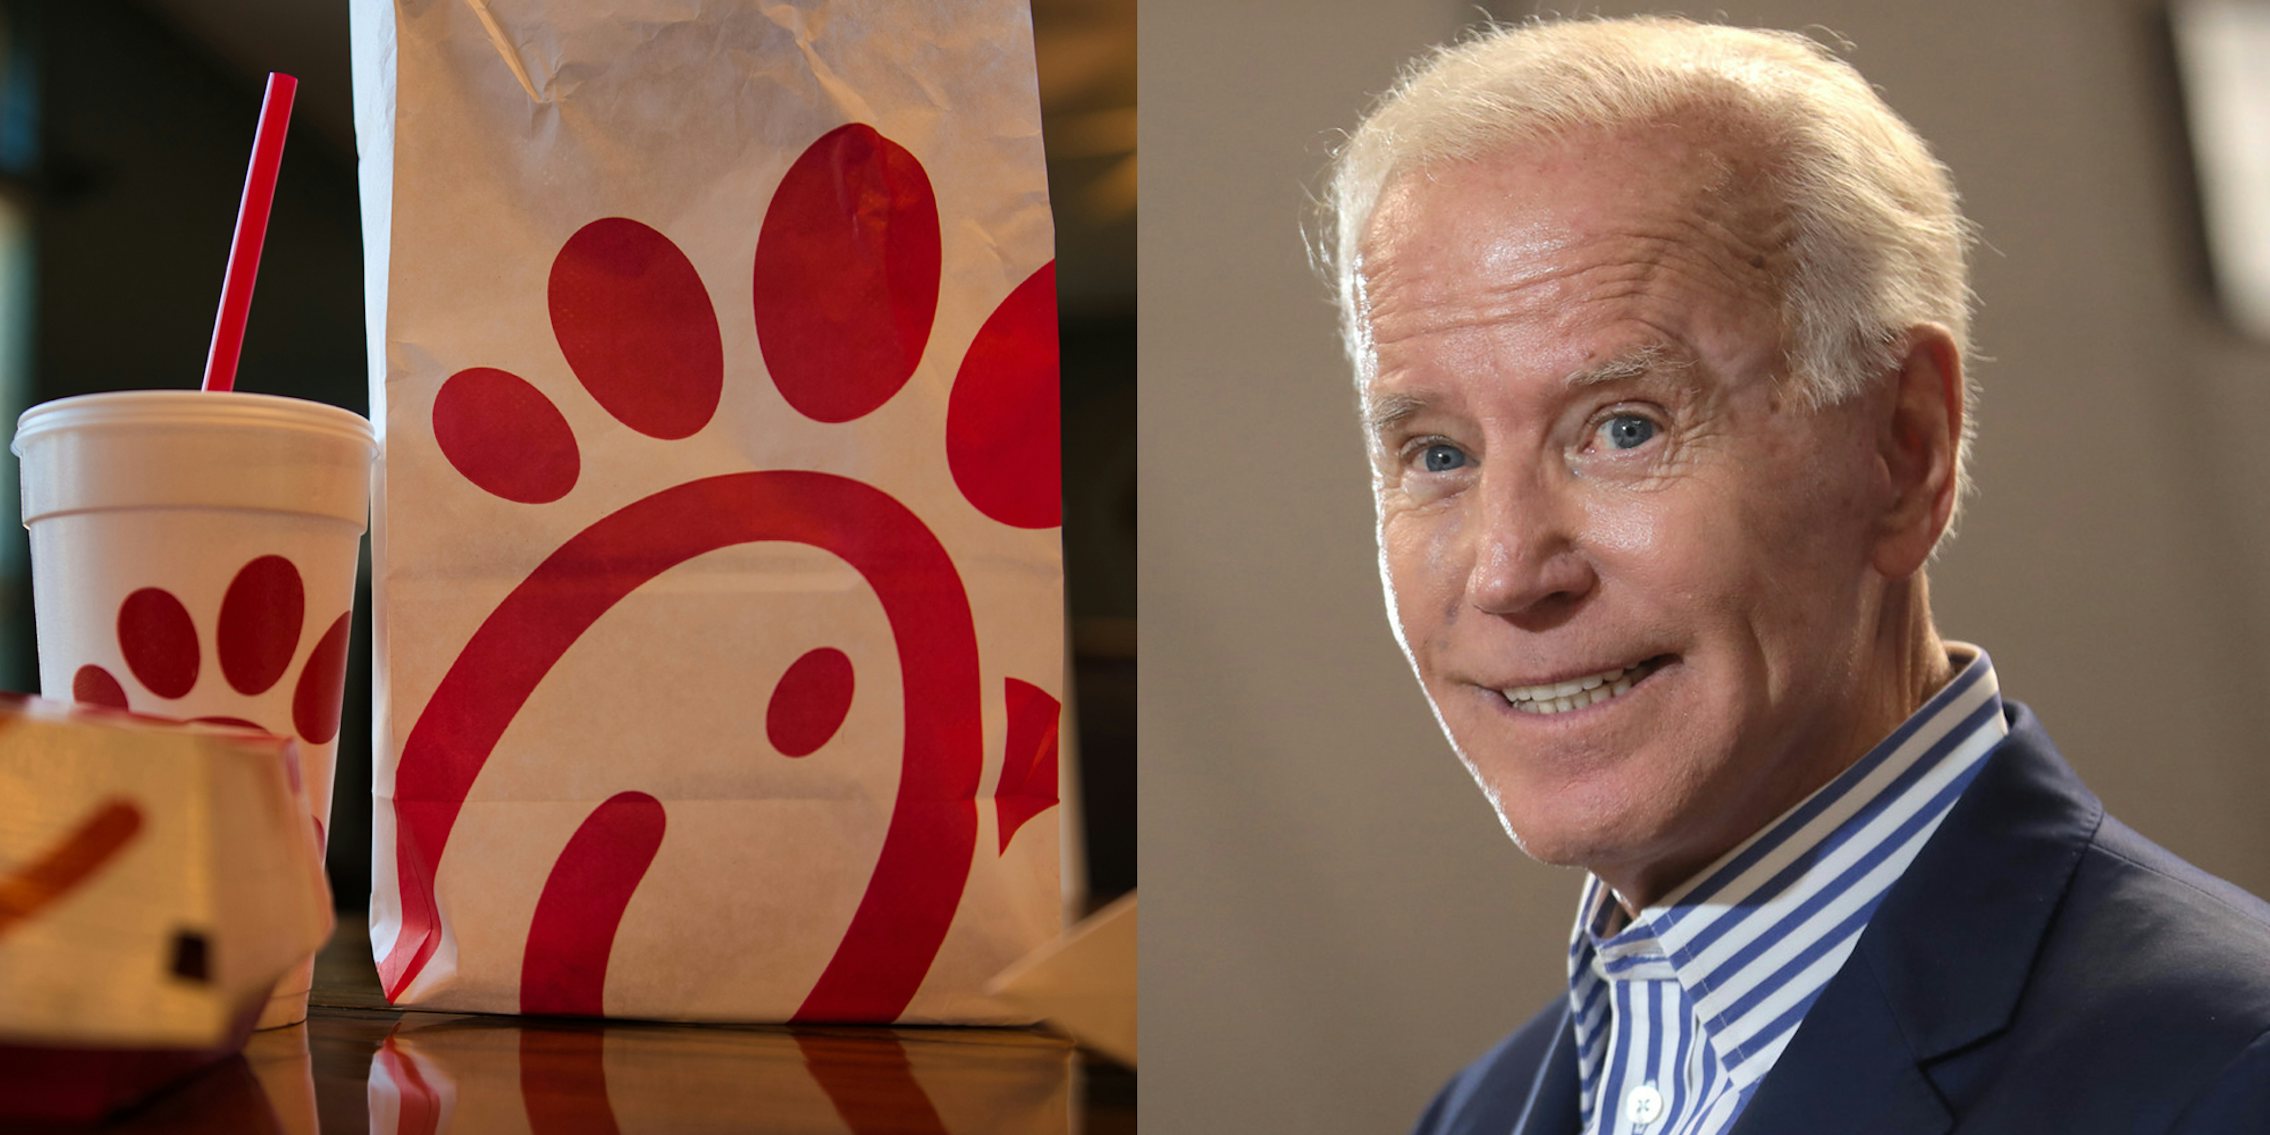 A meal from Chick-fil-A side by side with a picture of Joe Biden smiling.